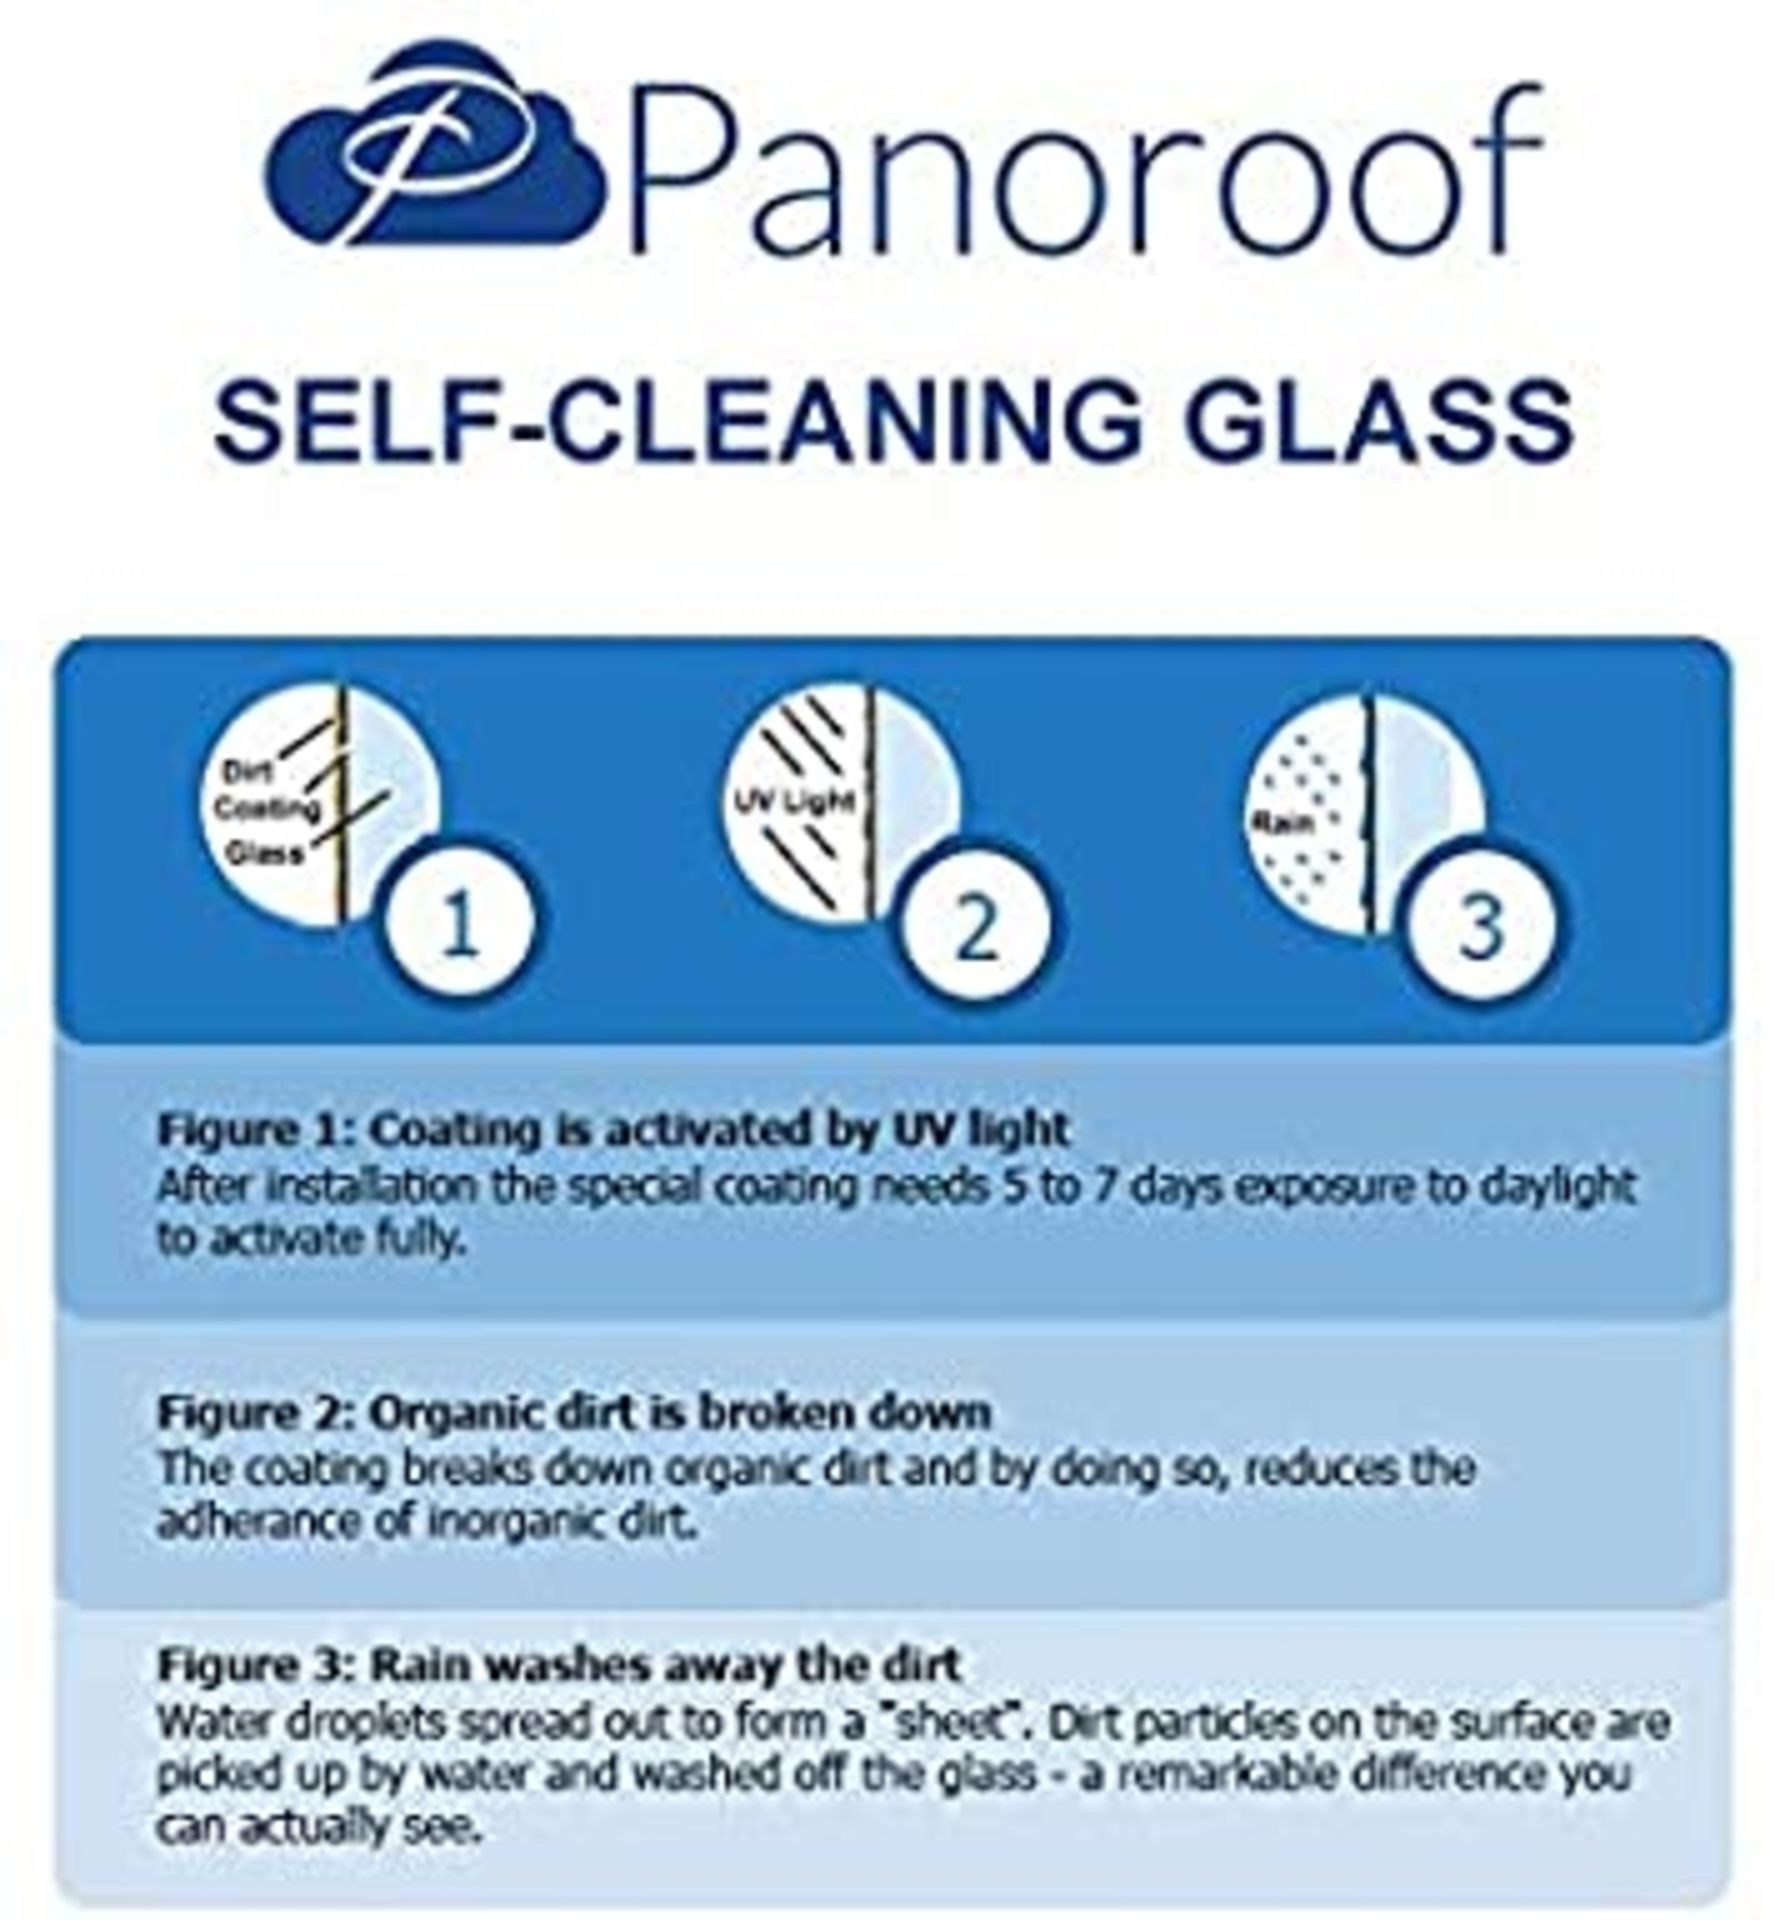 """Panoroof Triple Glazed Self Cleaning 800x1800mm (inside Size Visable glass area) Seamless Glass - Image 6 of 6